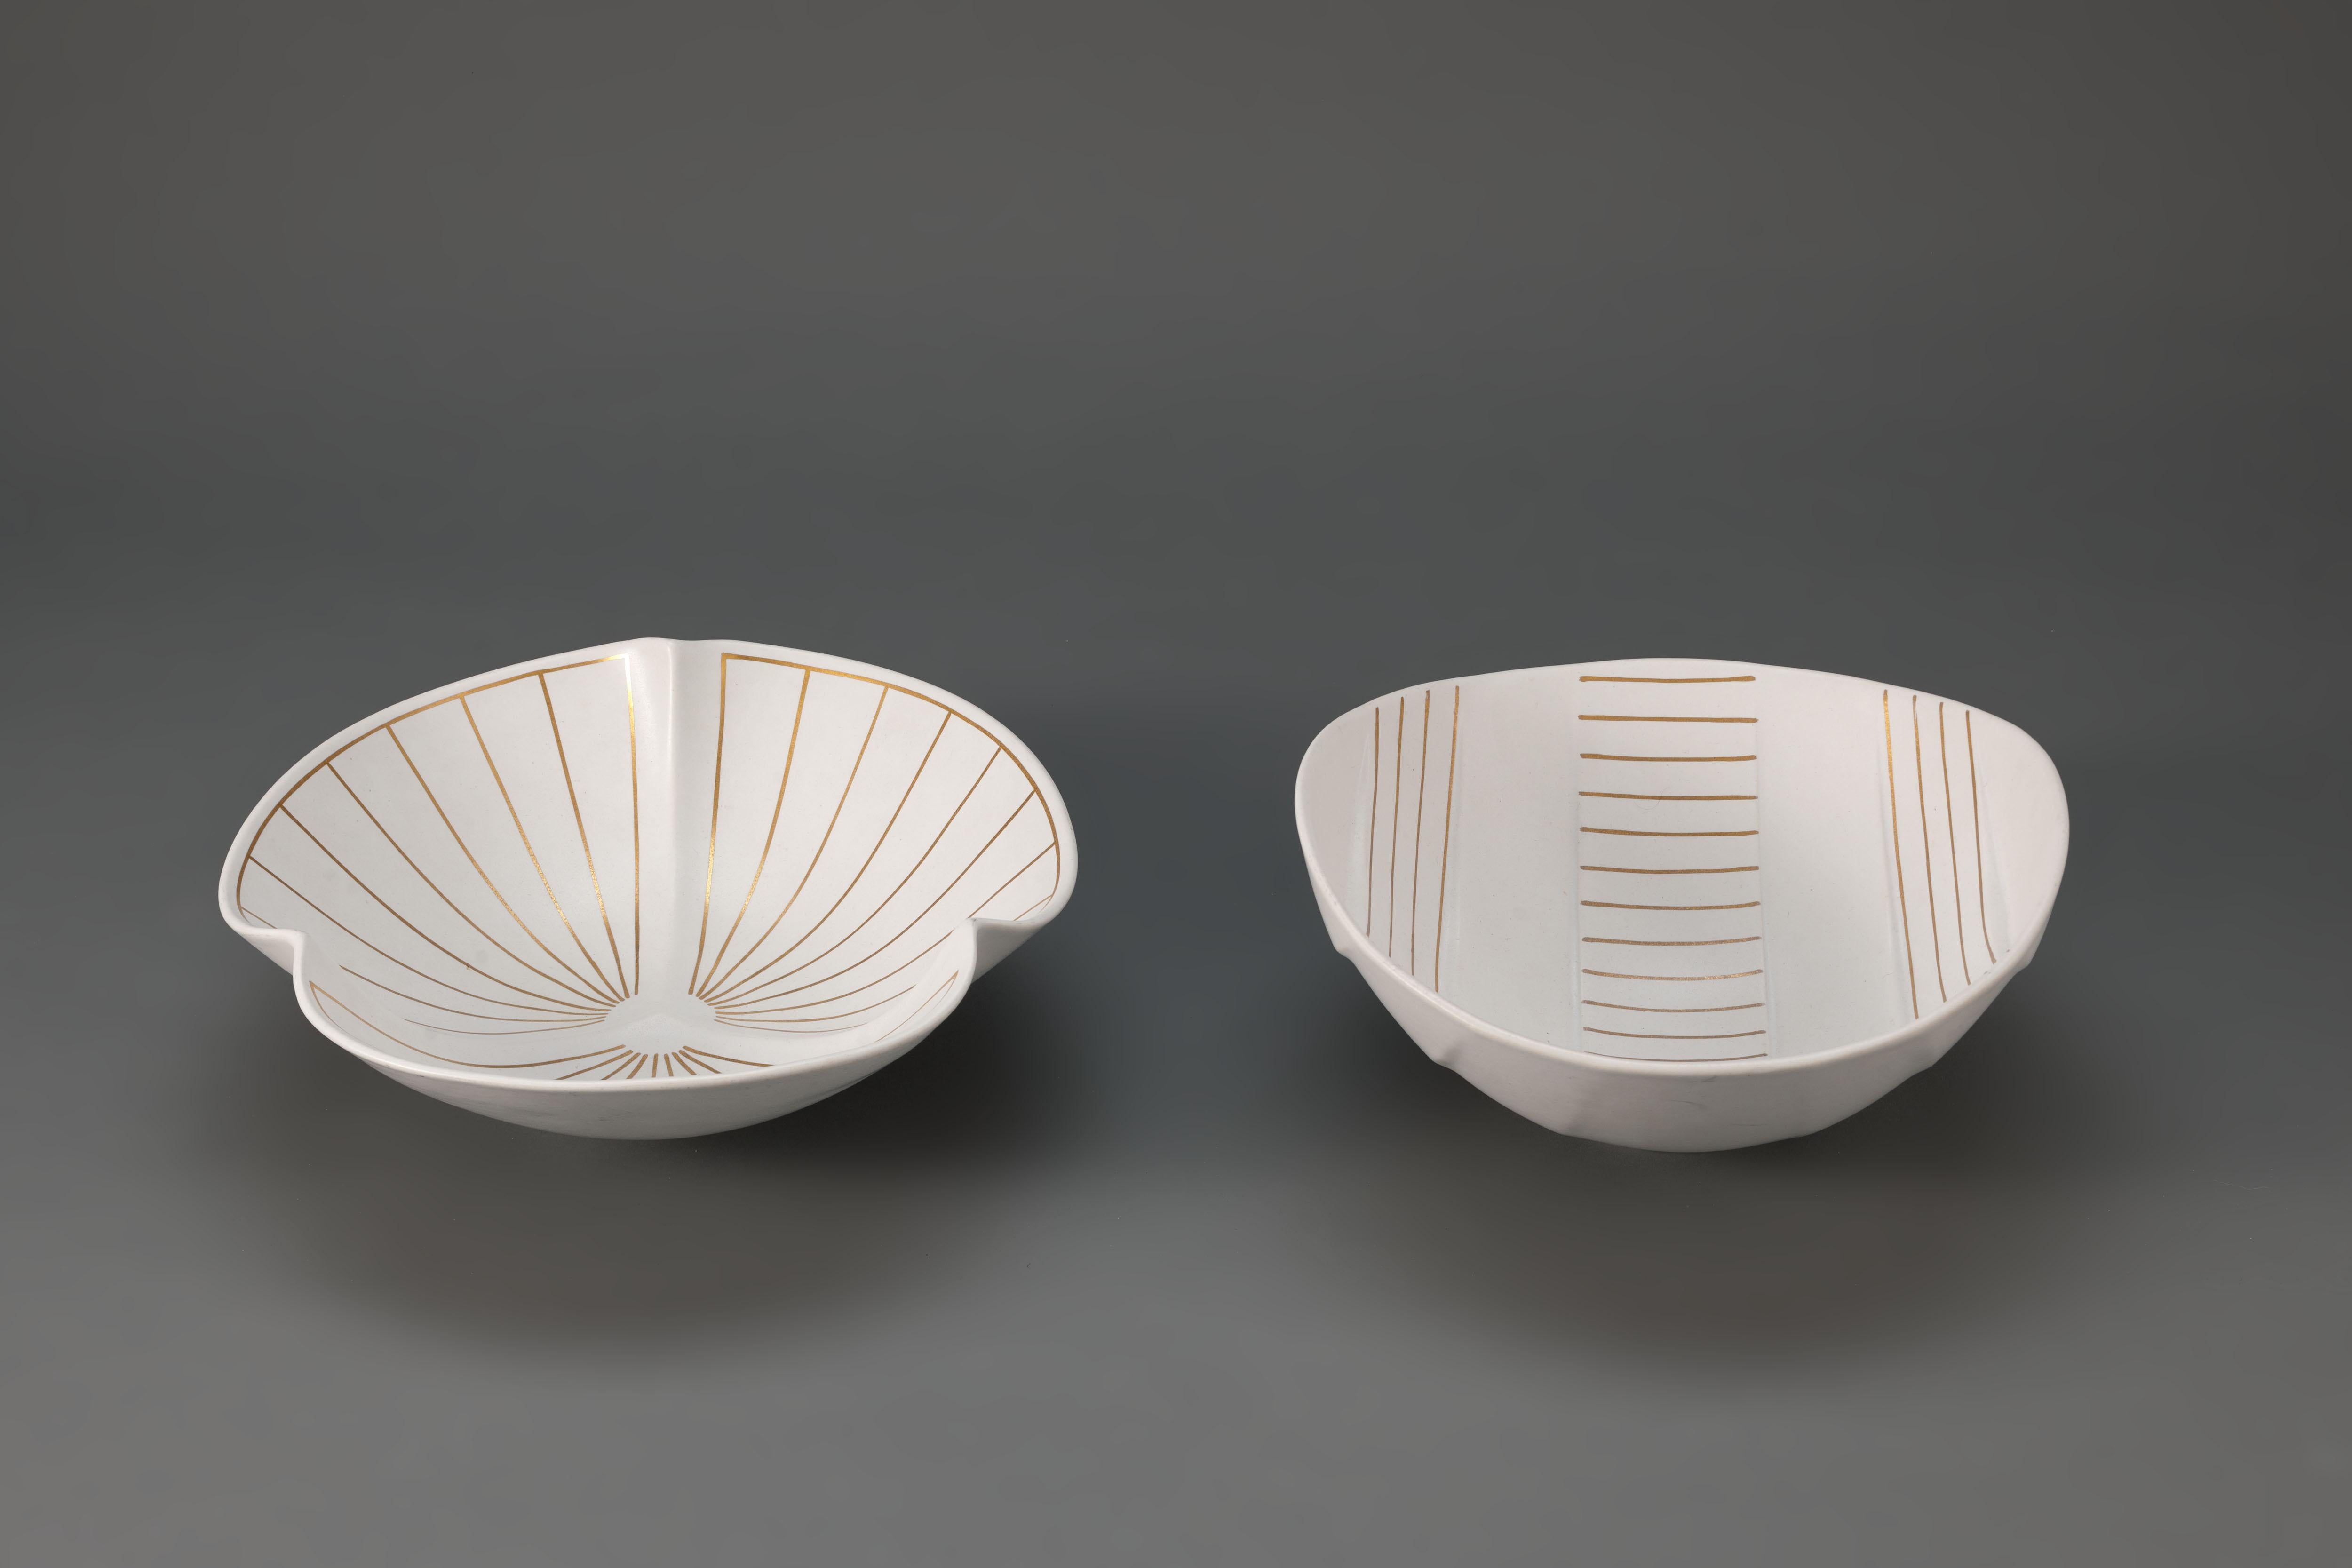 Pair of white Carrara glazed 'Surrea' (meaning 'surreal' in Swedish) bowls from the 'Guldsurrea' series by Wilhelm Kåge, designed in 1936. 

The Surreau series designs are characteristic because of their different counterbalance shape and therefore